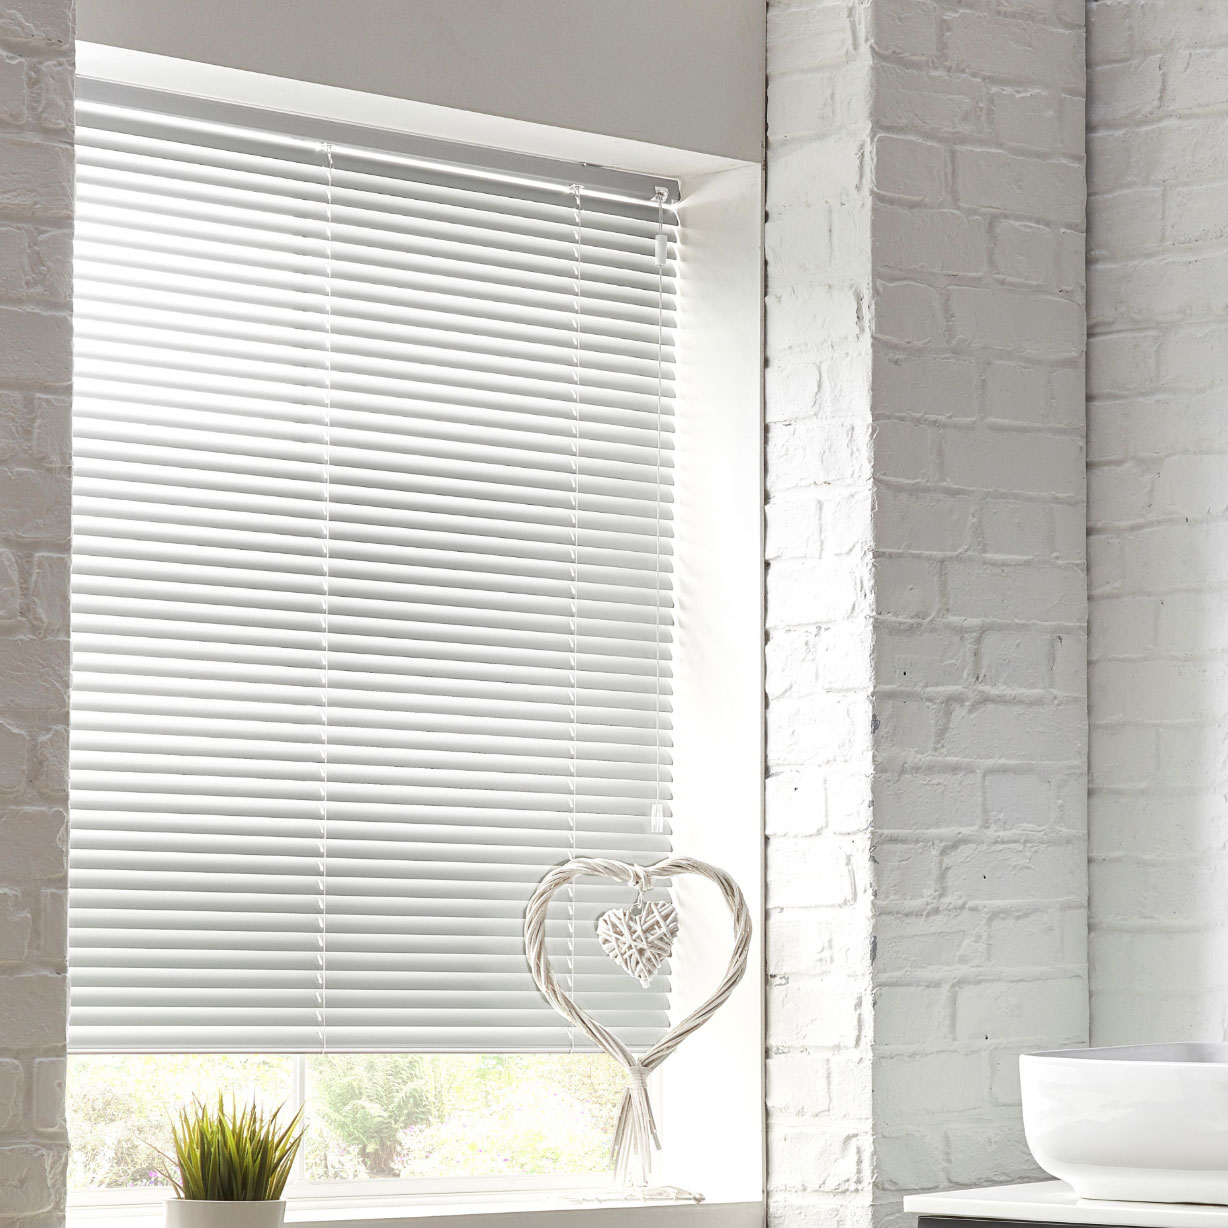 White aluminium venetian blind in white painted brick room with love heart ornament decoration on window sill